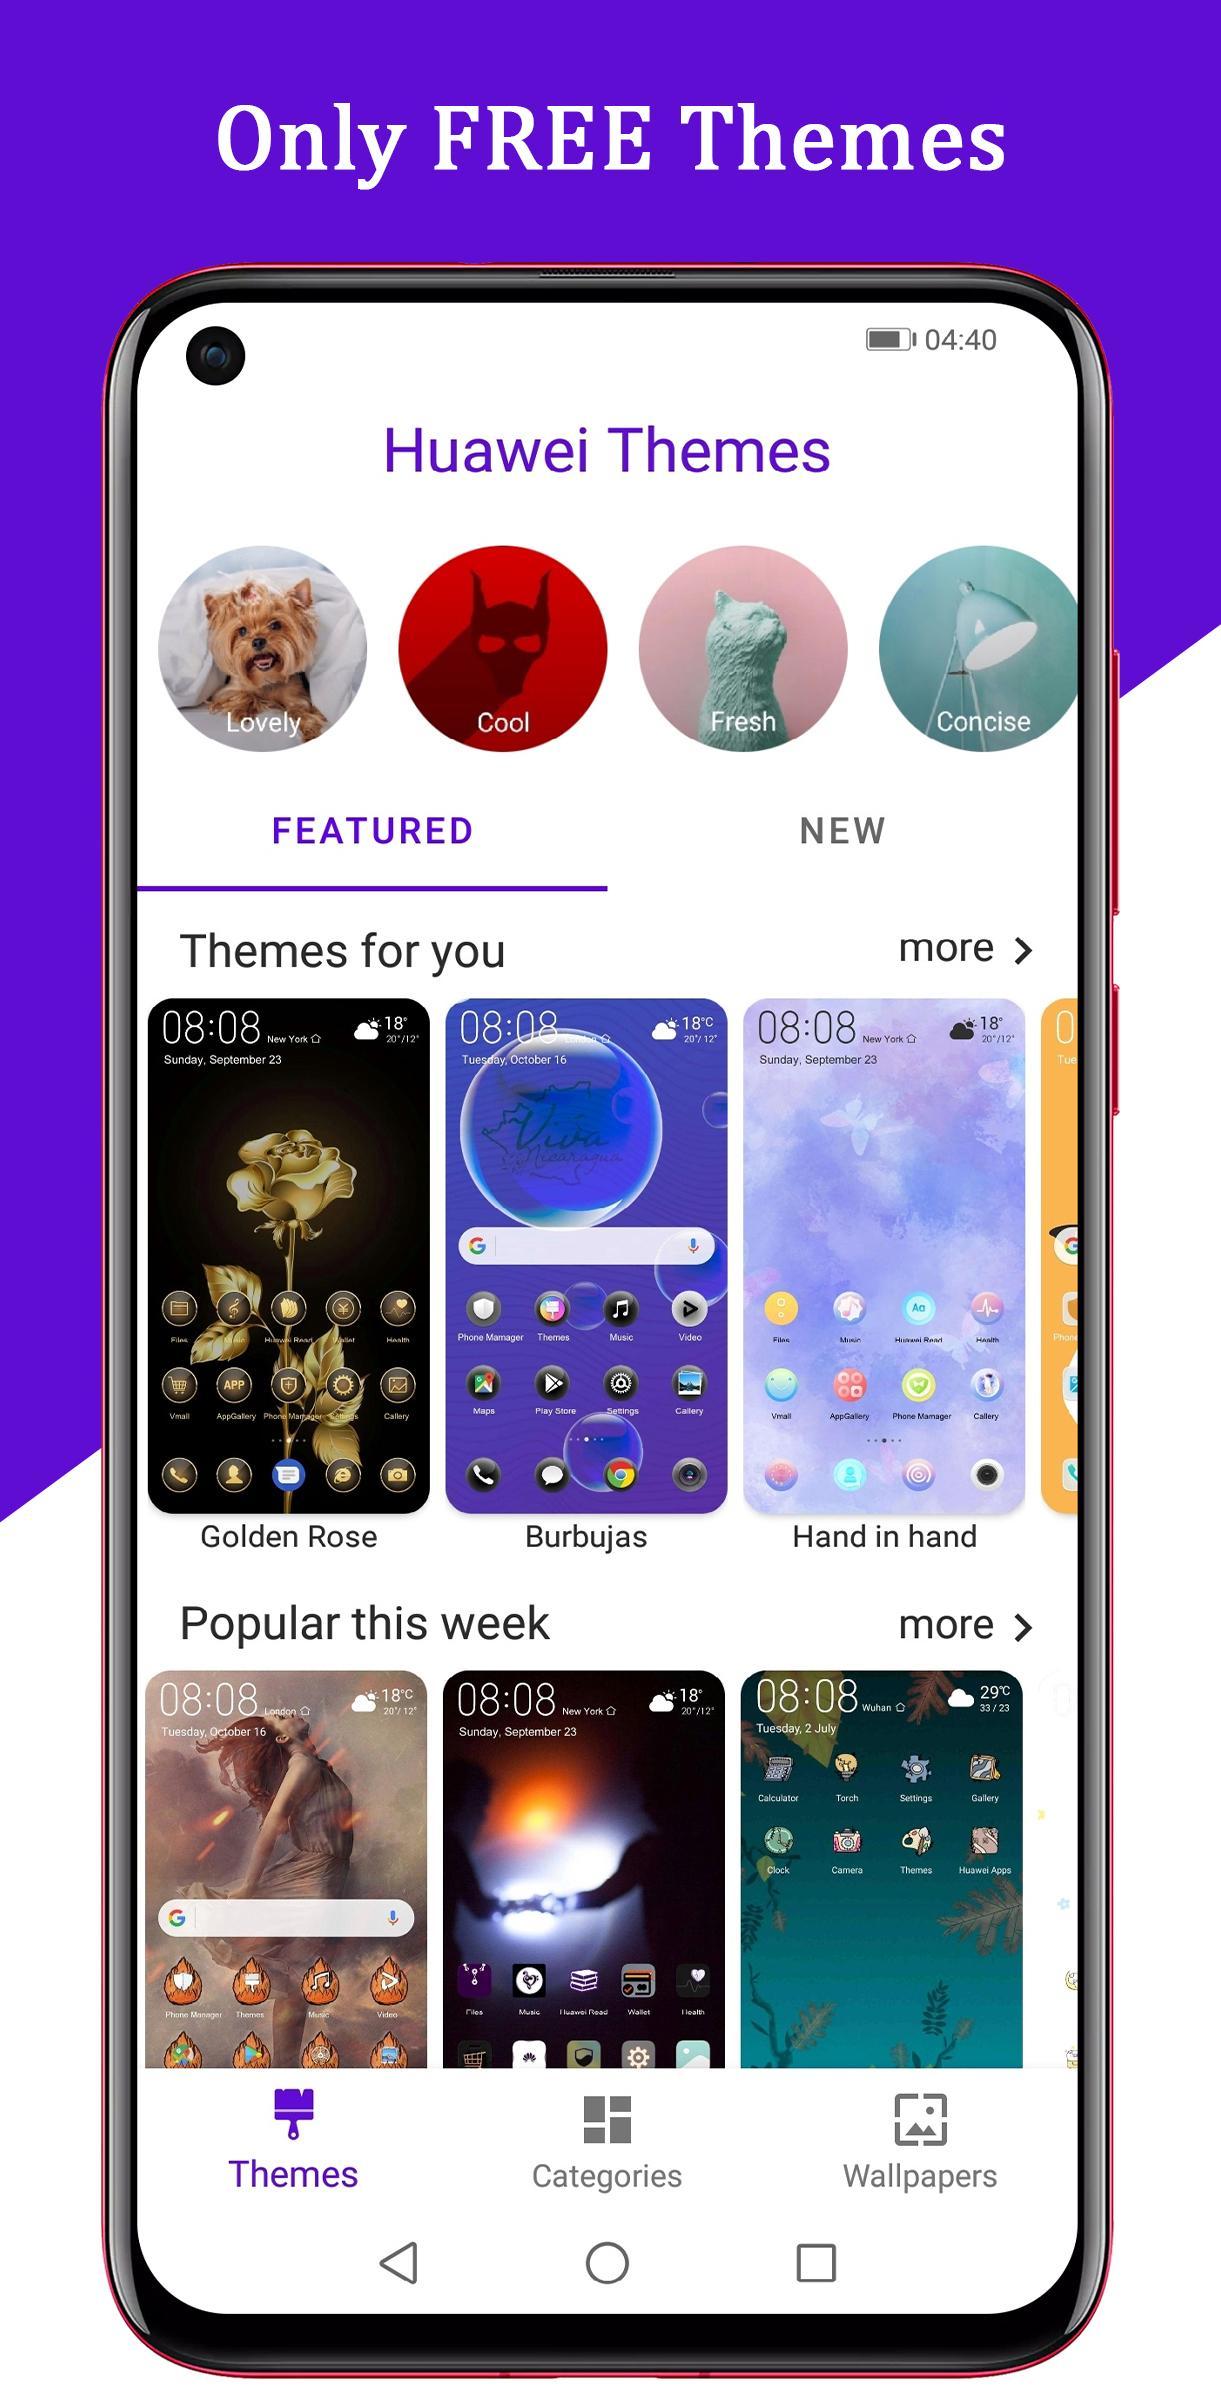 Free EMUI themes for Huawei and Honor